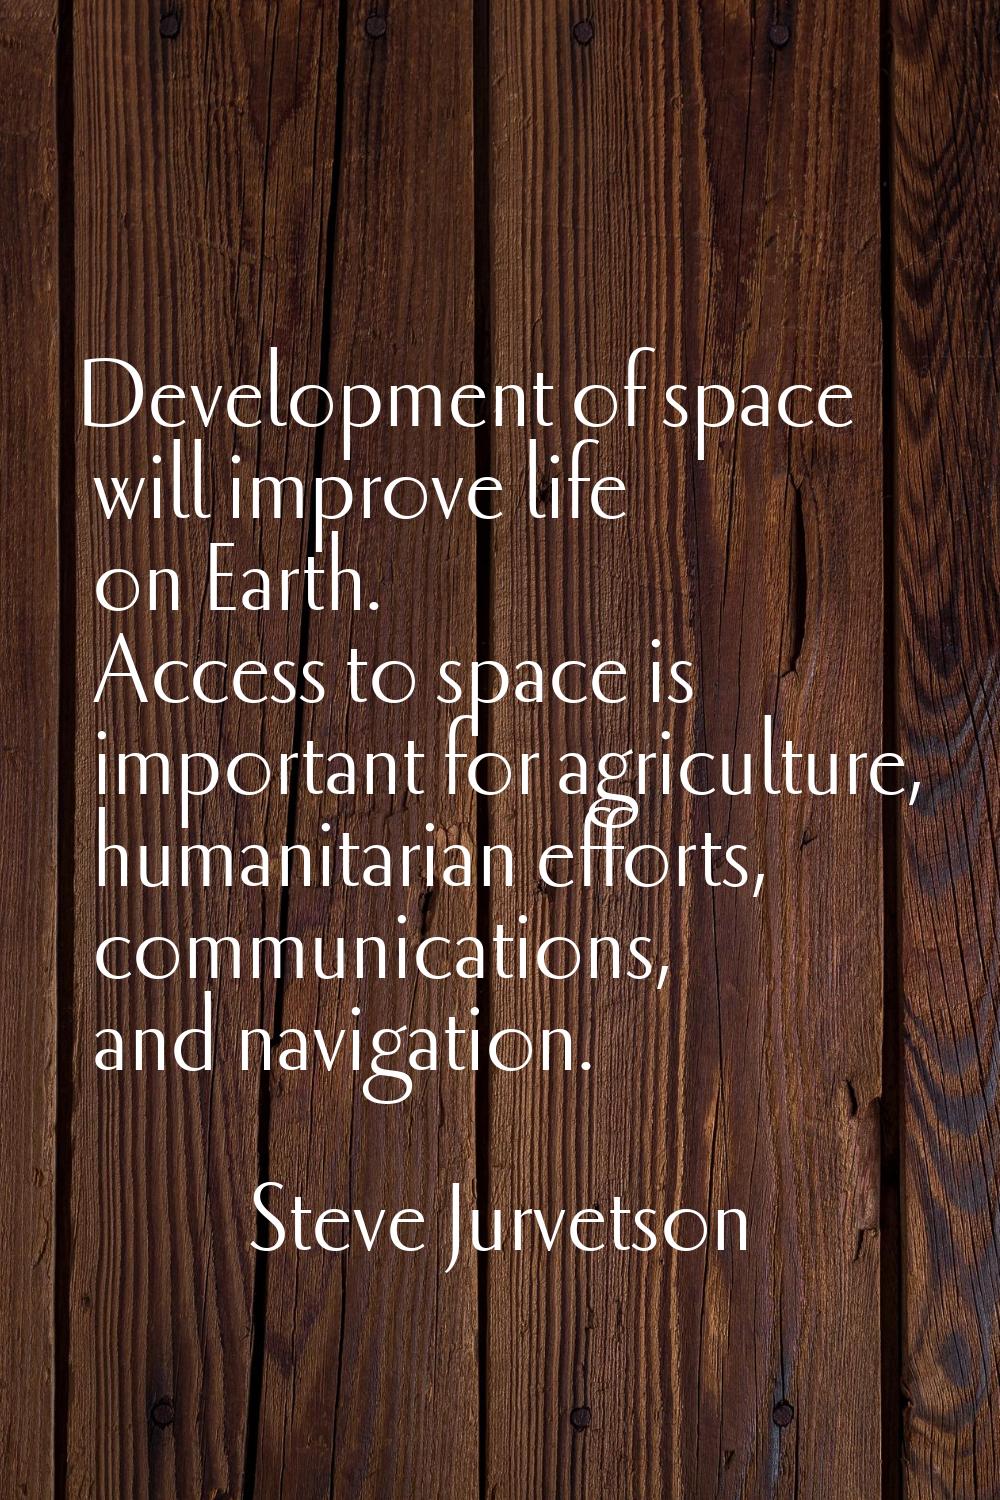 Development of space will improve life on Earth. Access to space is important for agriculture, huma